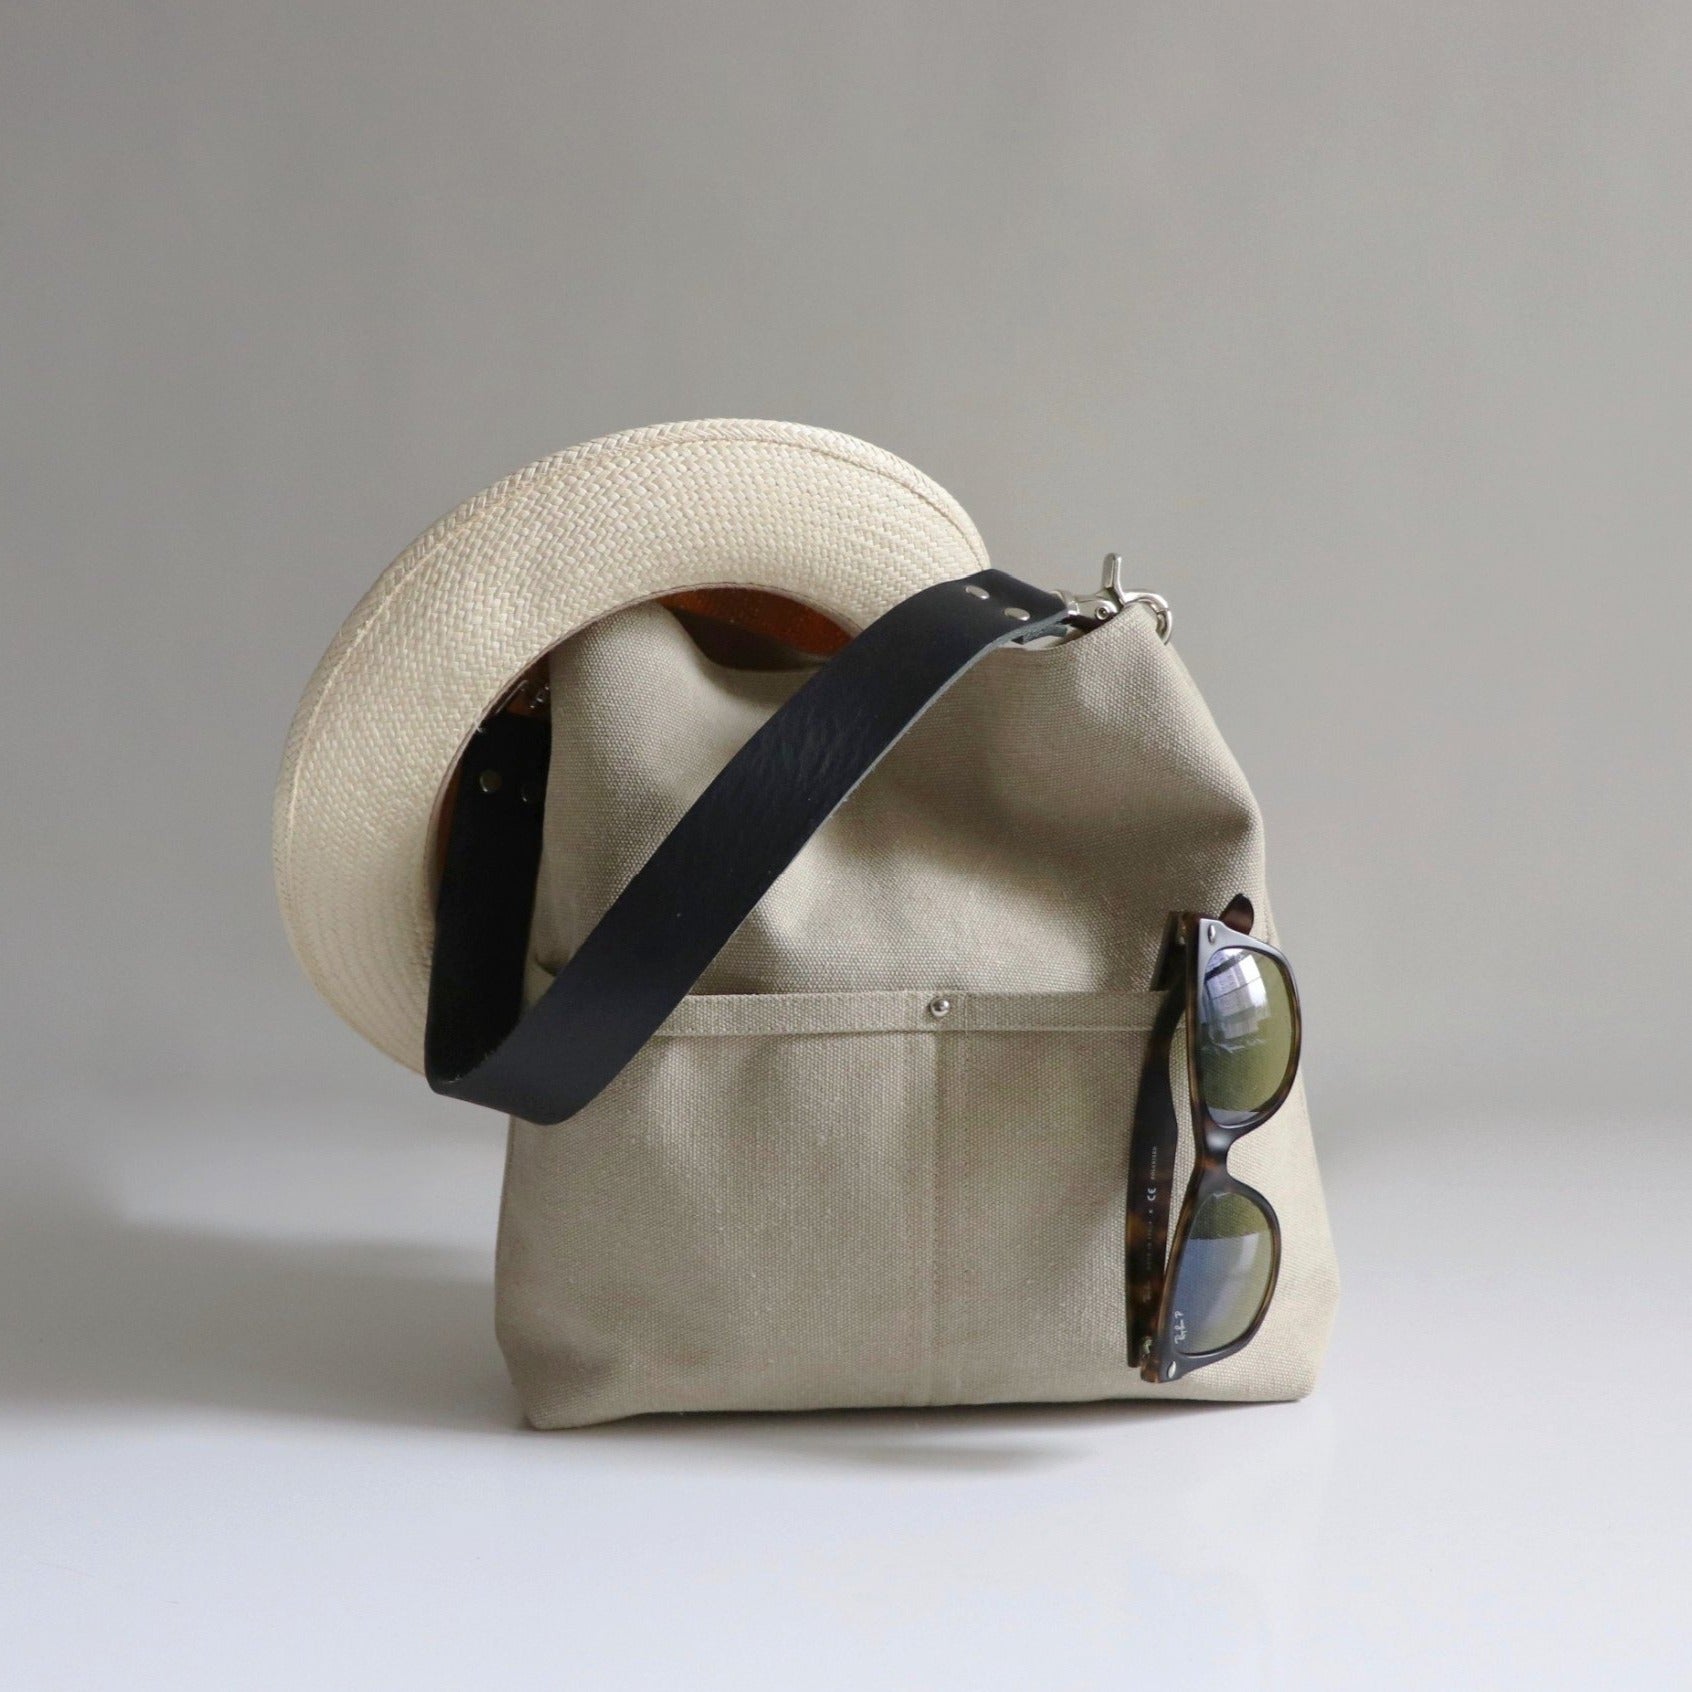 Canvas bag with sunglasses